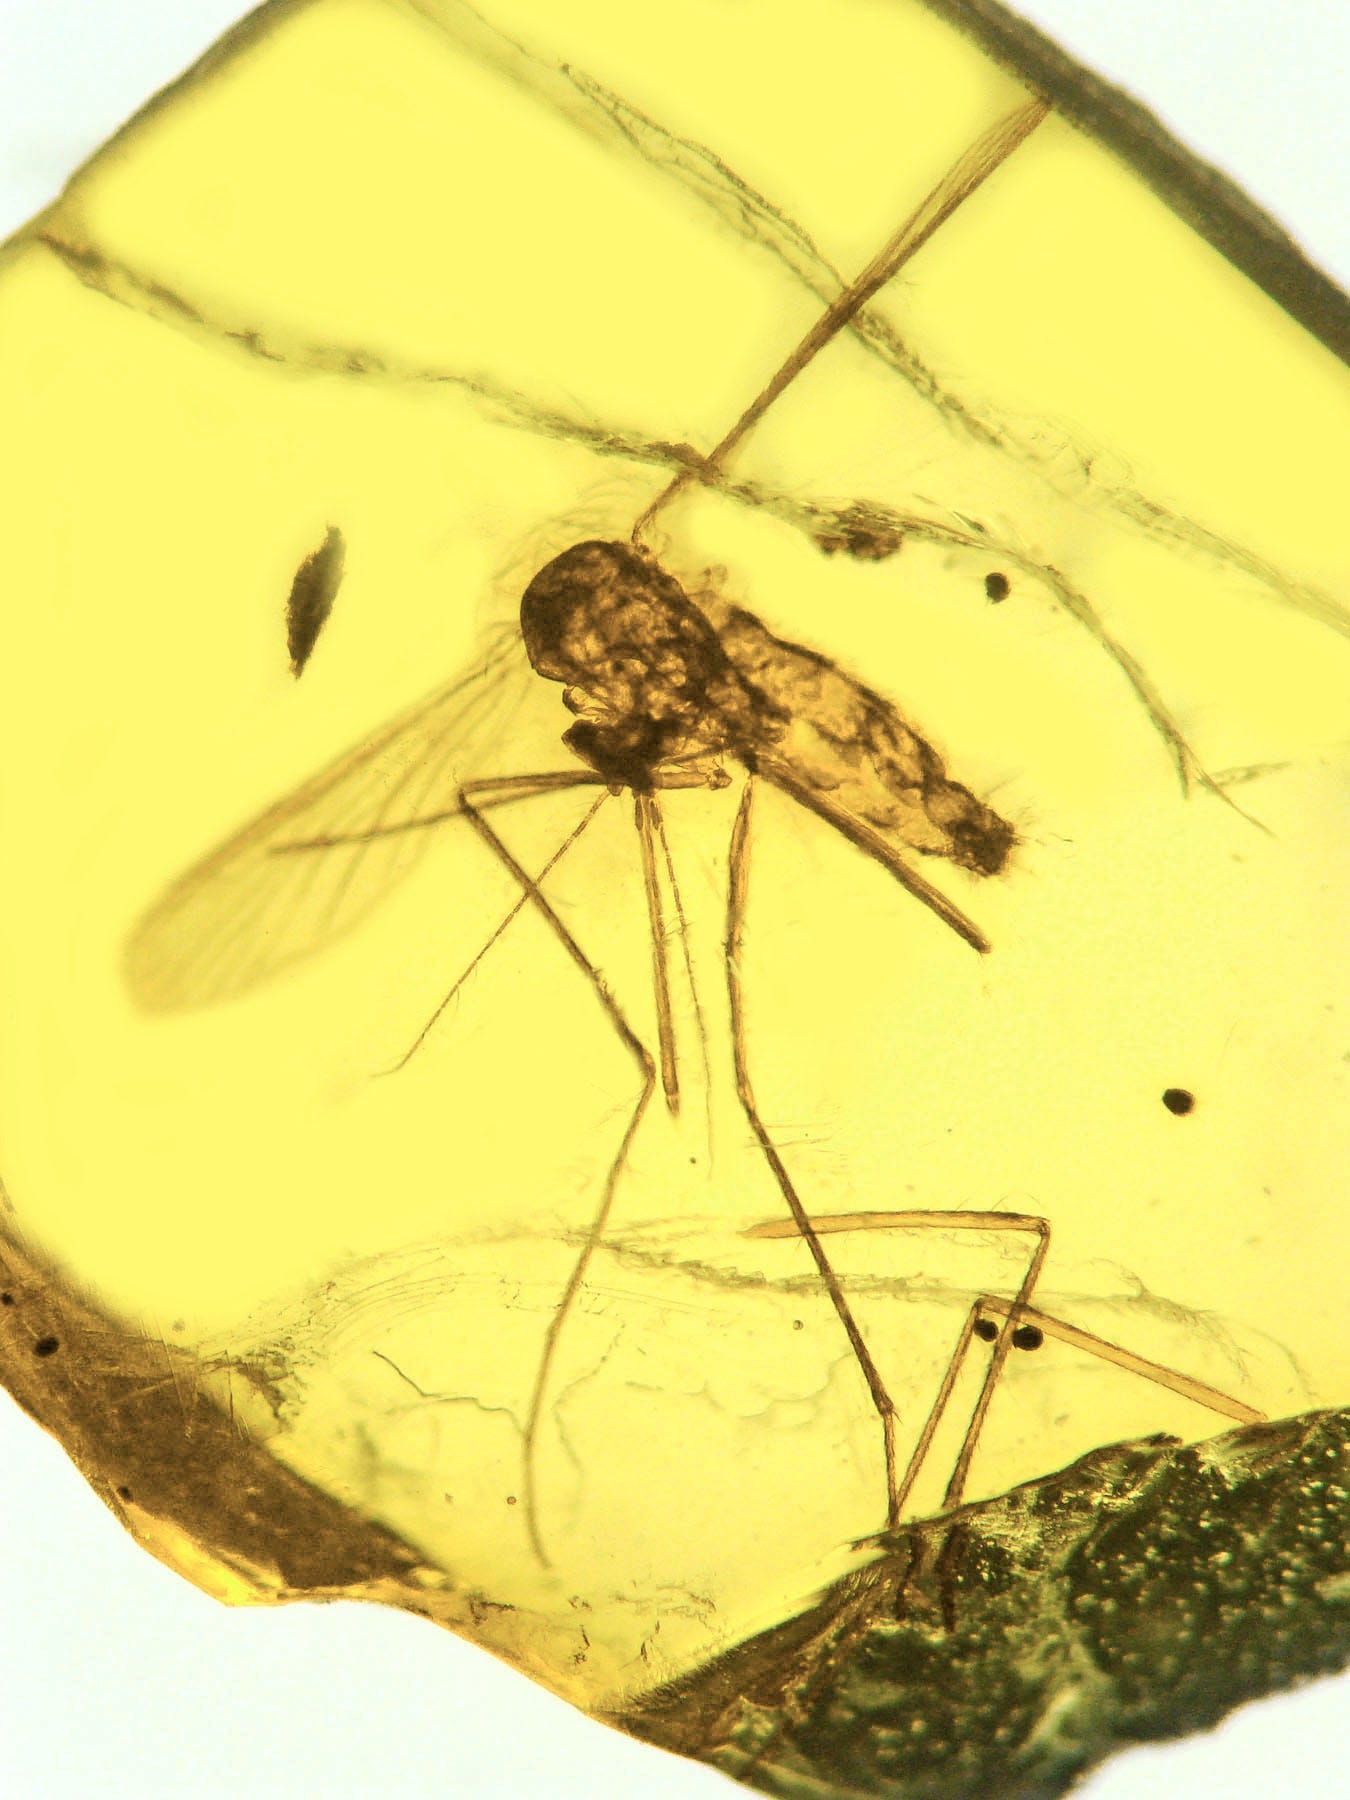 The oldest malaria ever found: a 15-20 million year old Culex malariager mosquito carrying the malaria-causing Plasmodium parasite, discovered preserved in amber in the Dominican Republic. Courtesy Oregon State University via Wikimedia Commons.